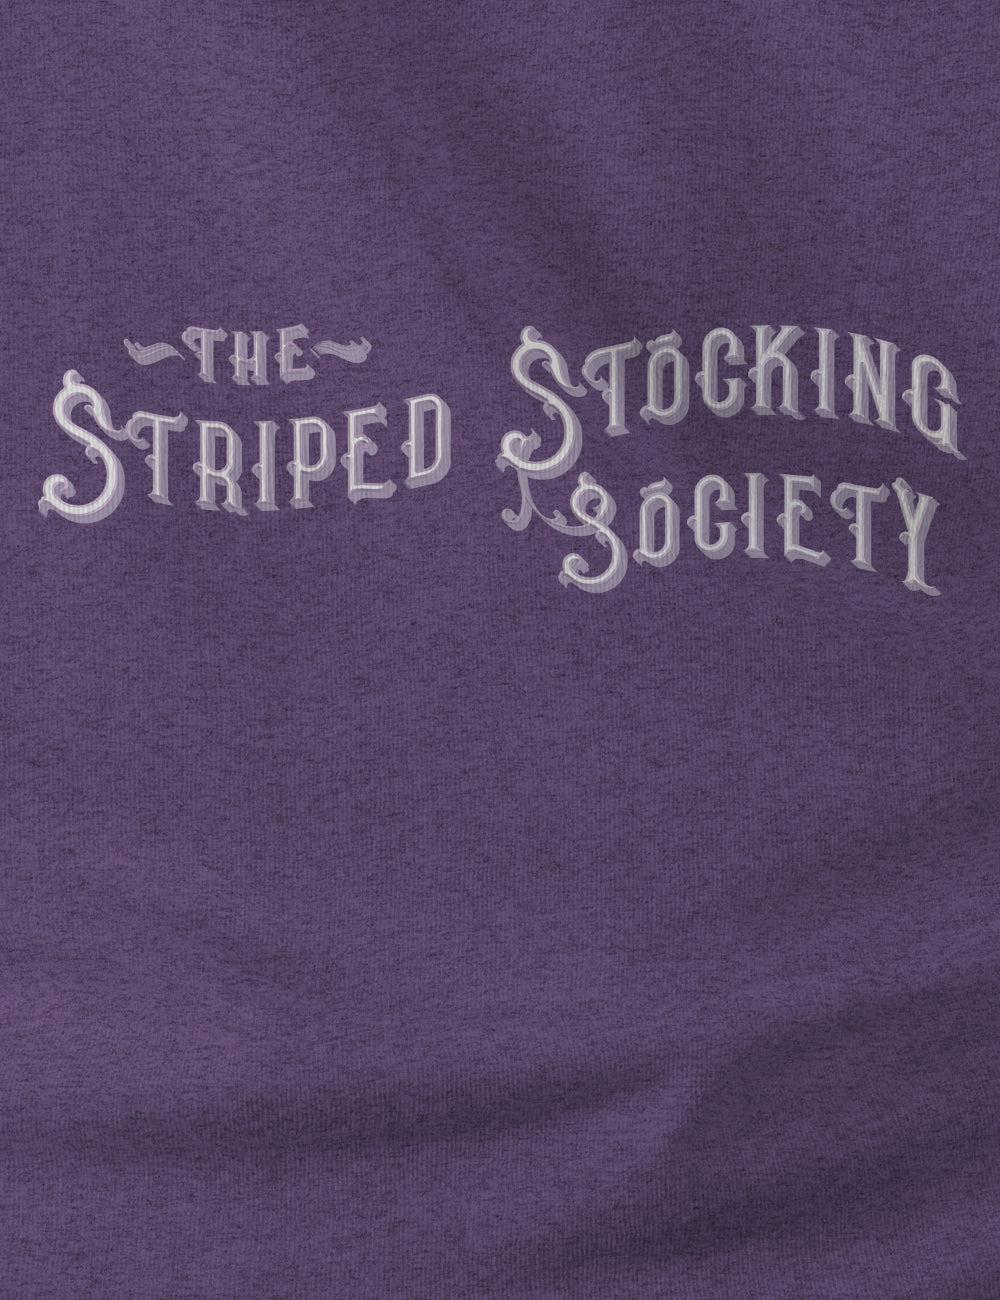 Striped Stocking Society TriBlend Premium Tee | Double Sided | Unisex